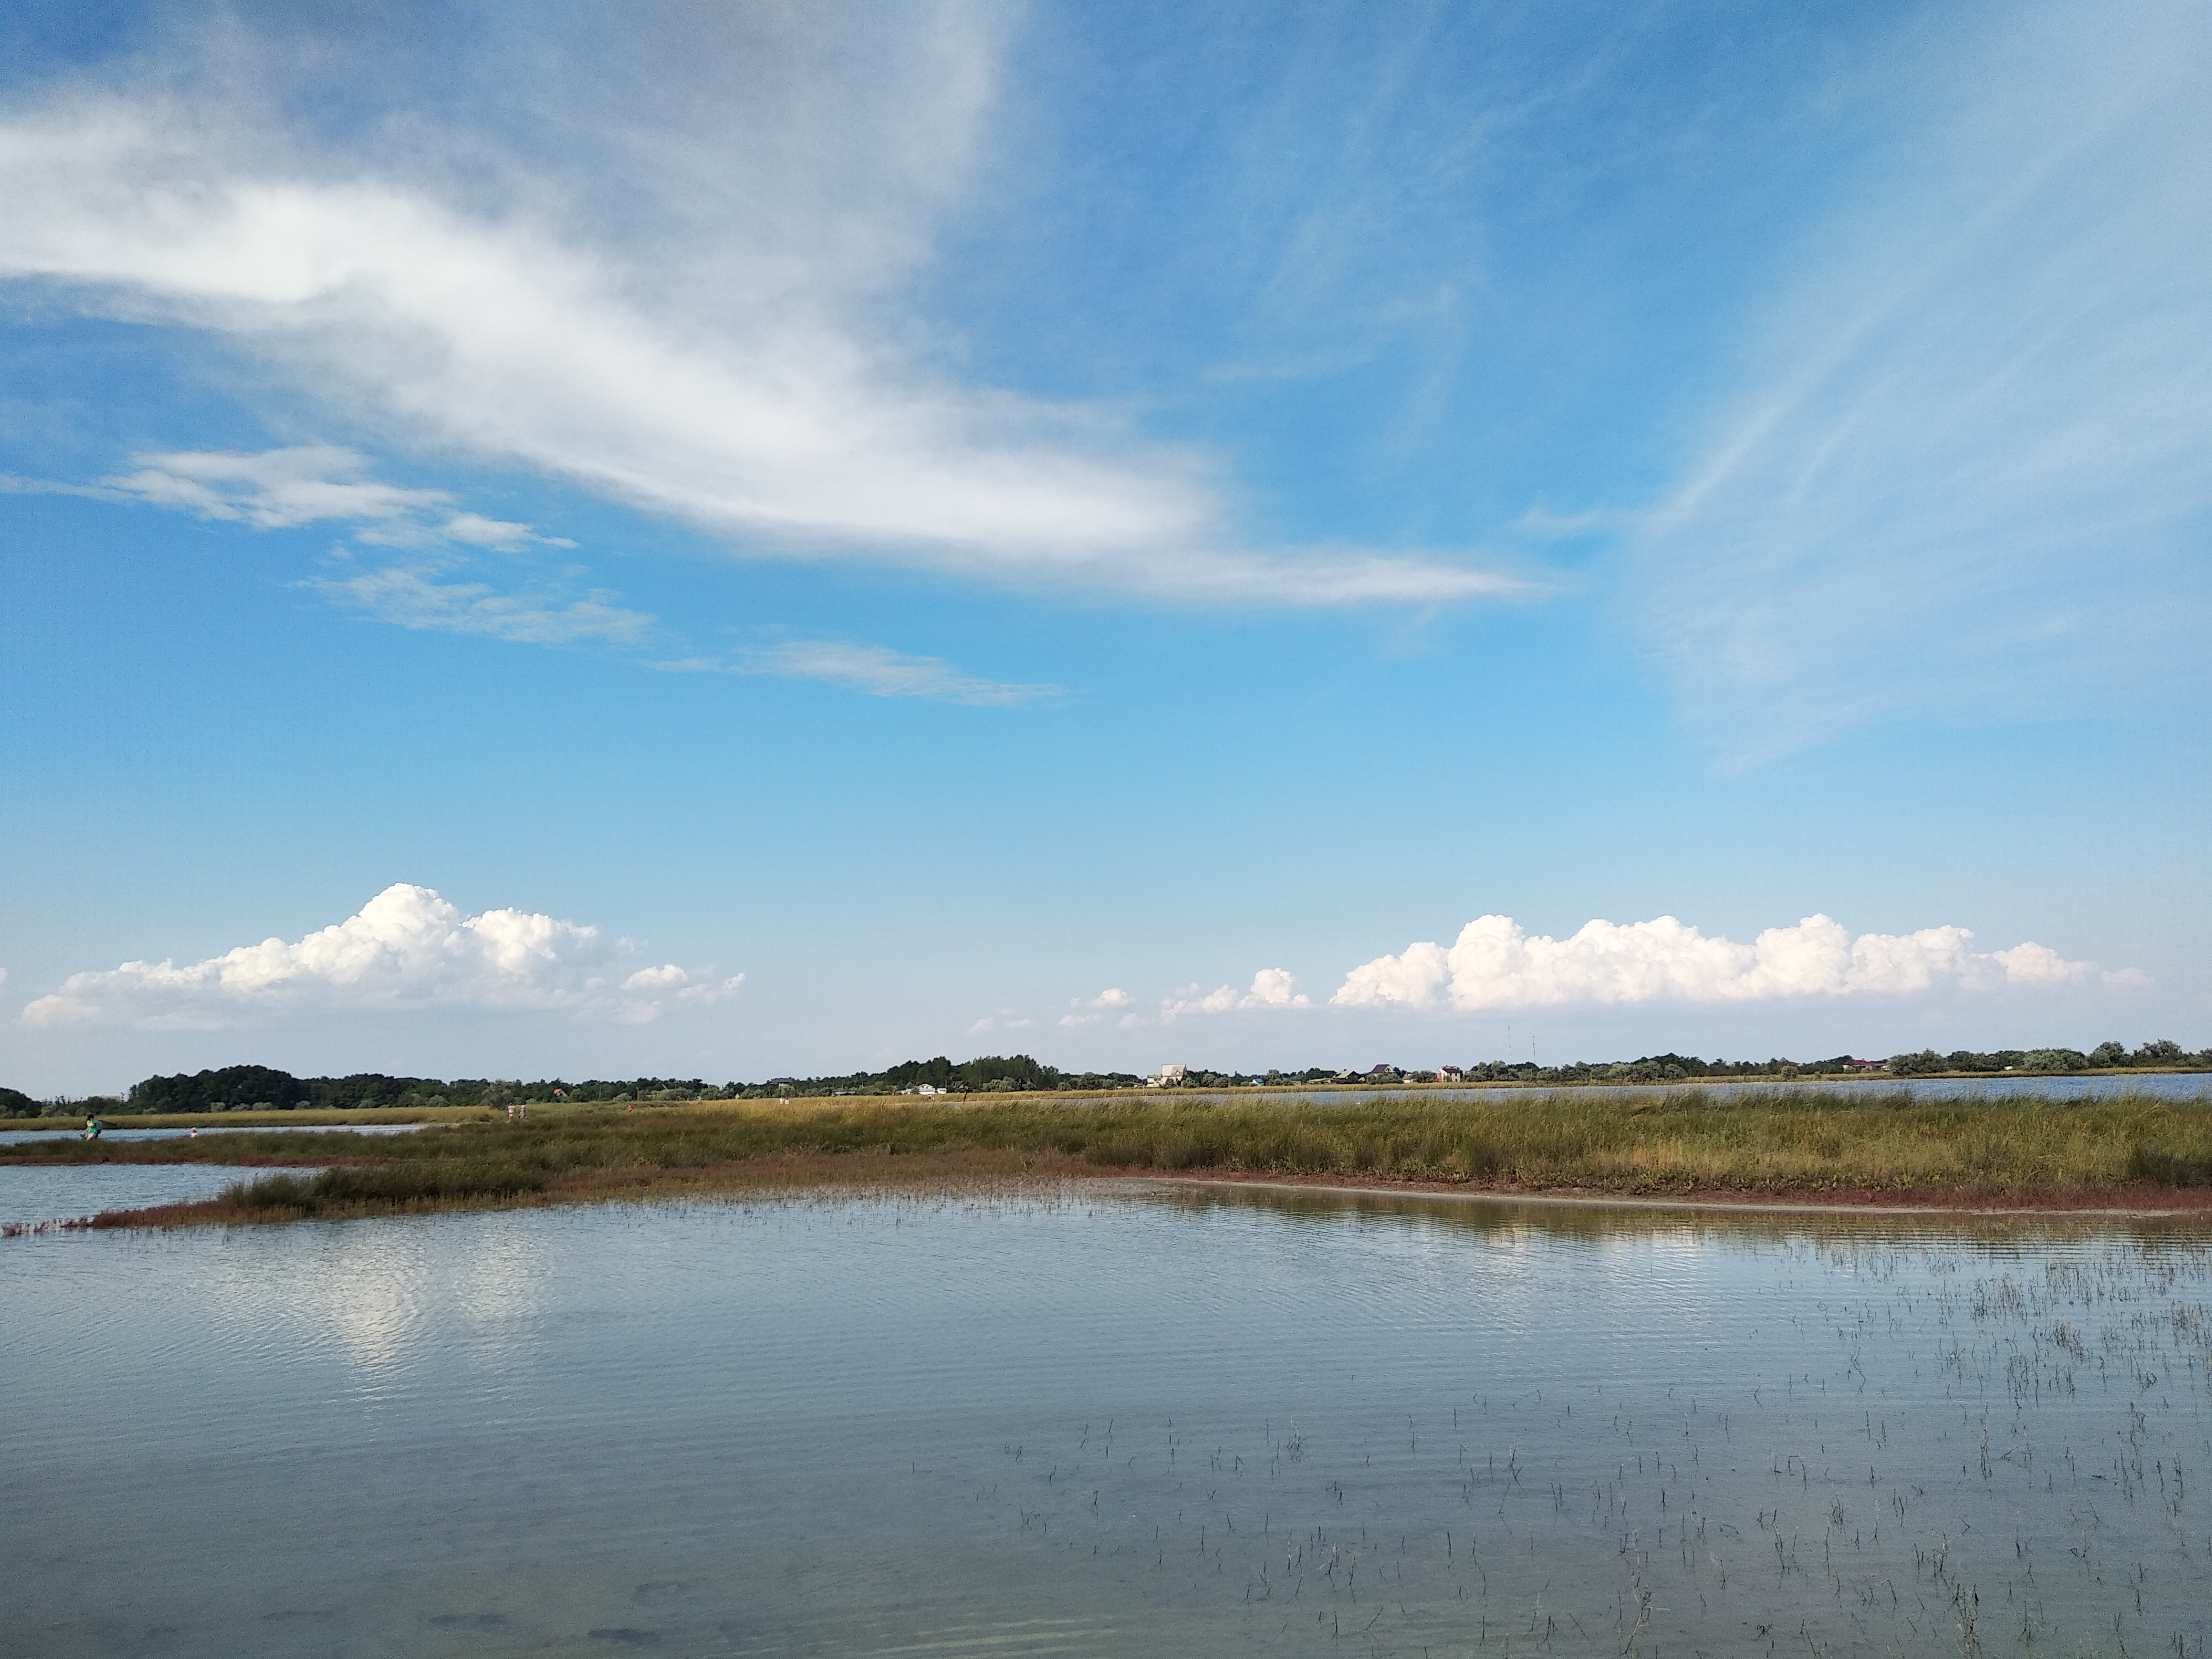 Body of water with grassy banks under a blue sky with wispy clouds. 